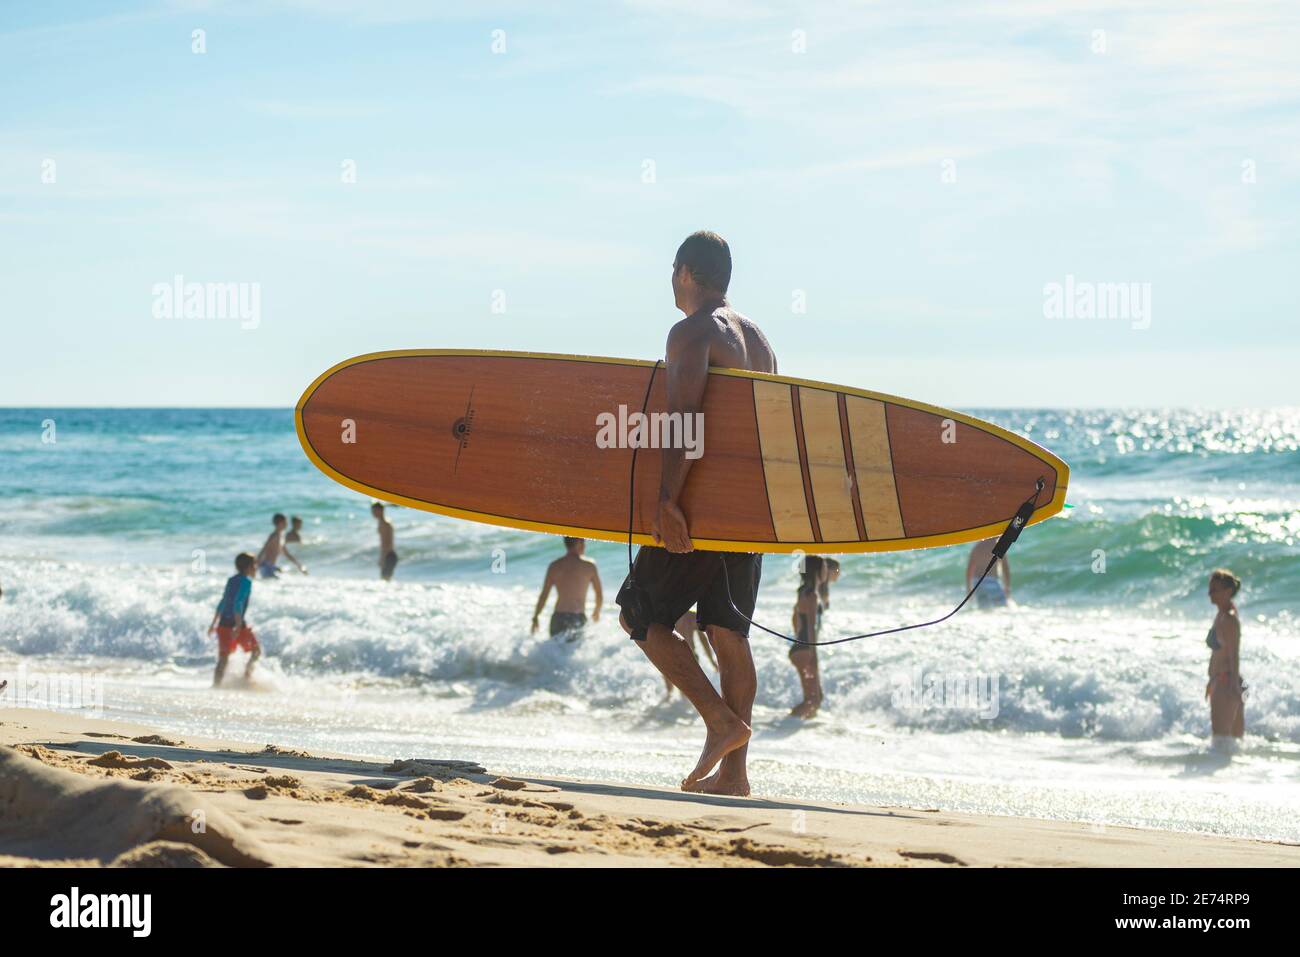 Man with longoboard type surf board on the beach in Biscarrosse. Biscarrosse Plage is an important surf destination on the Atlantic Ocean in France Stock Photo